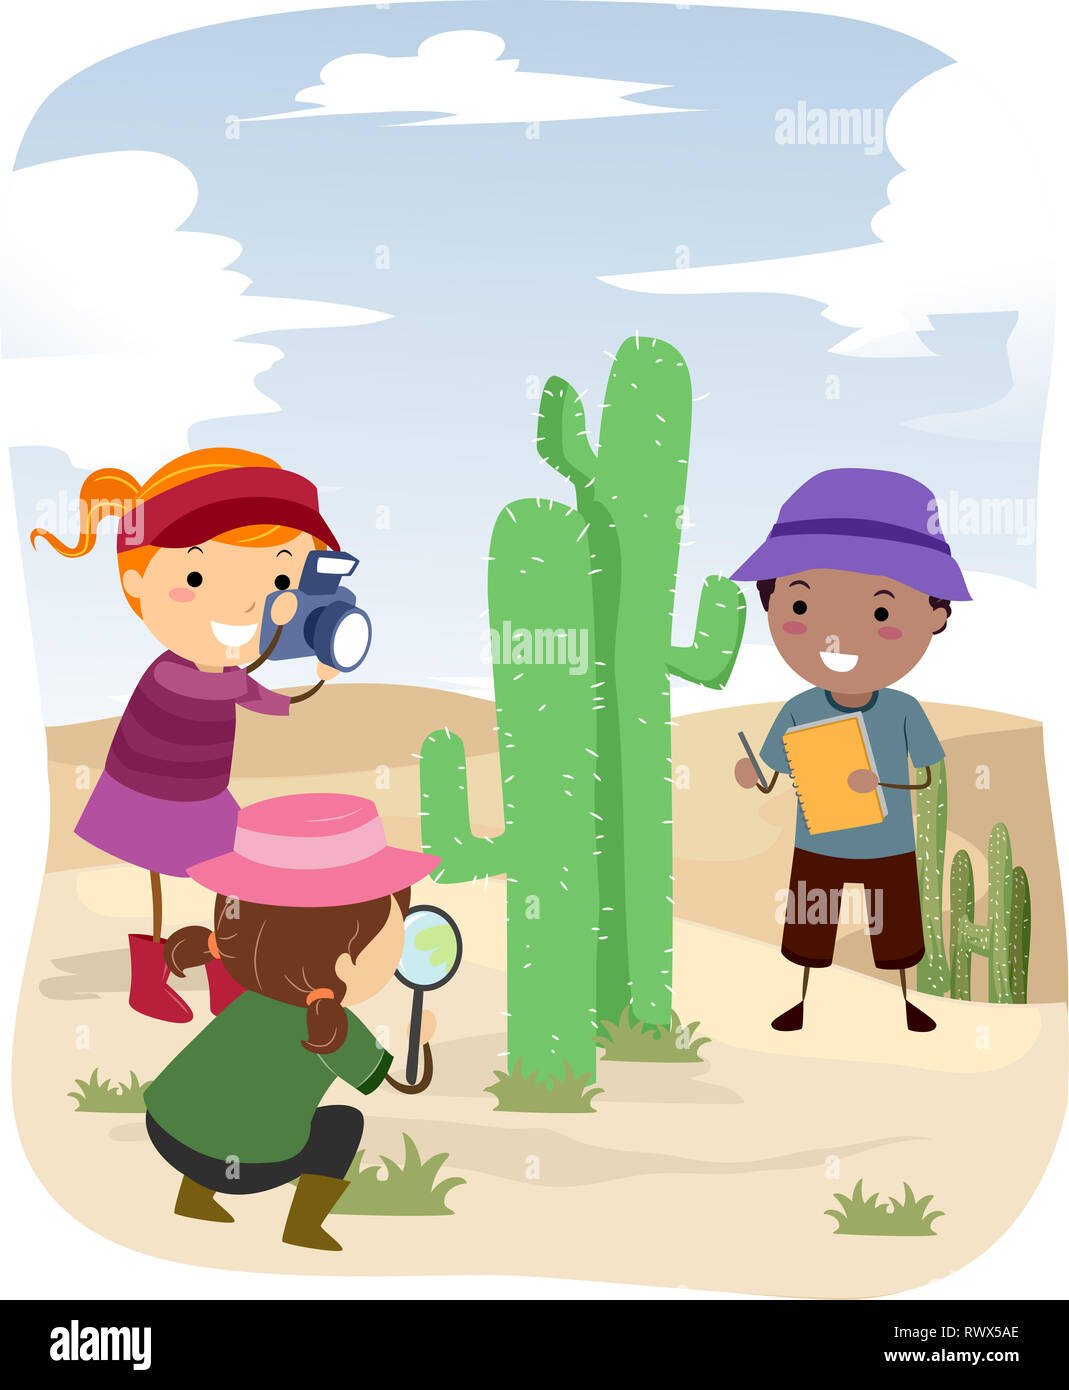 Illustration of Stickman Kids Using Magnifying Glass and Taking Photos and Notes, Observing a Cactus Plant at the Desert Stock Photo